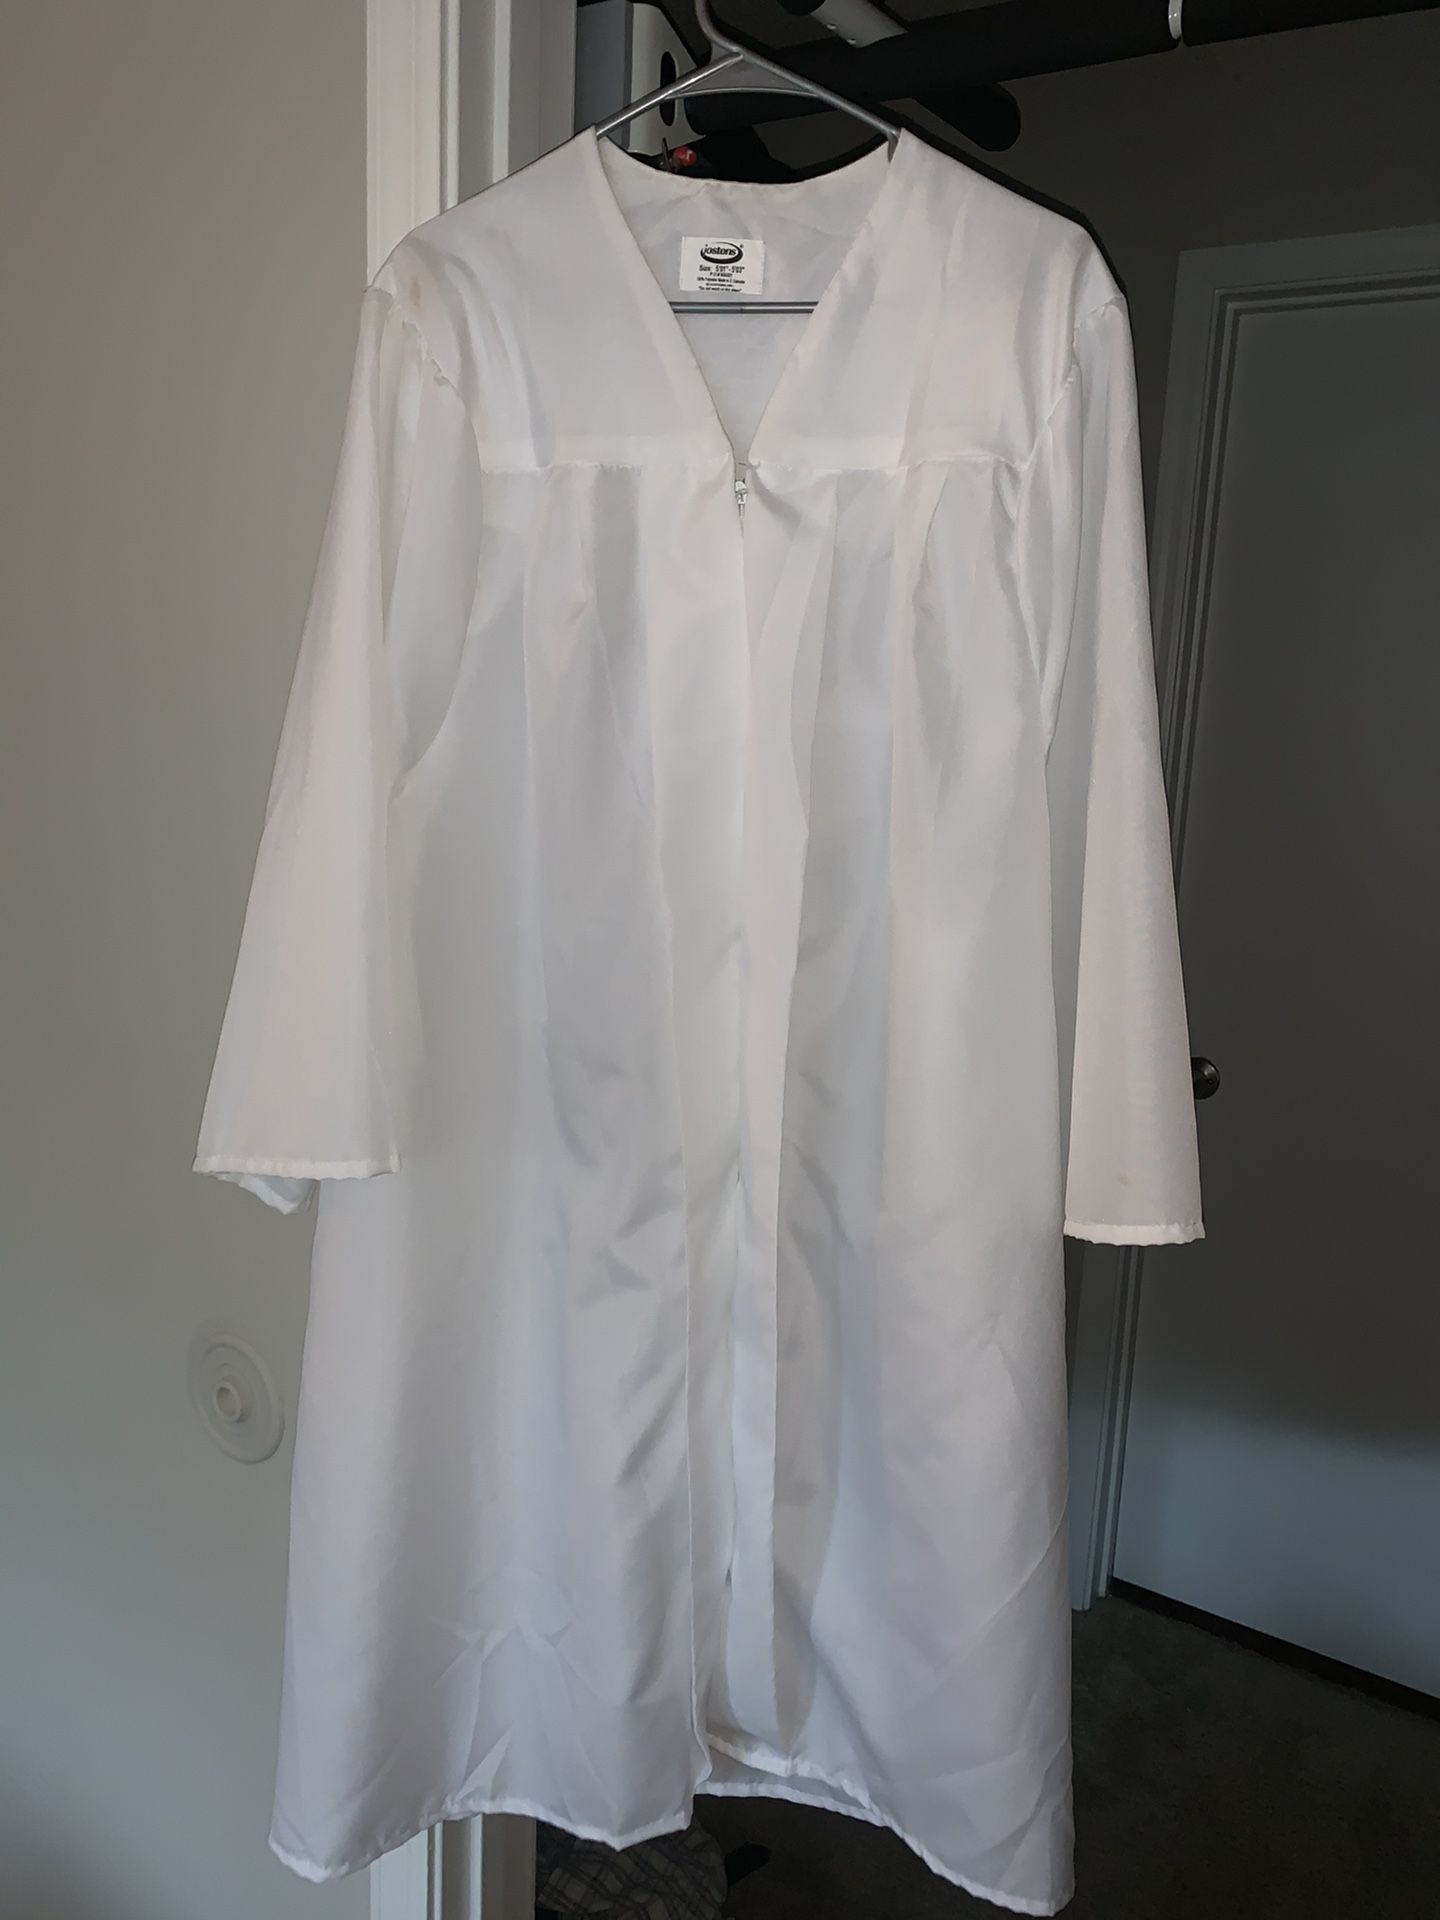 Josten’s White Graduation Gown and Cap - Size 5' 1" - 5' 3" - 100% Polyester